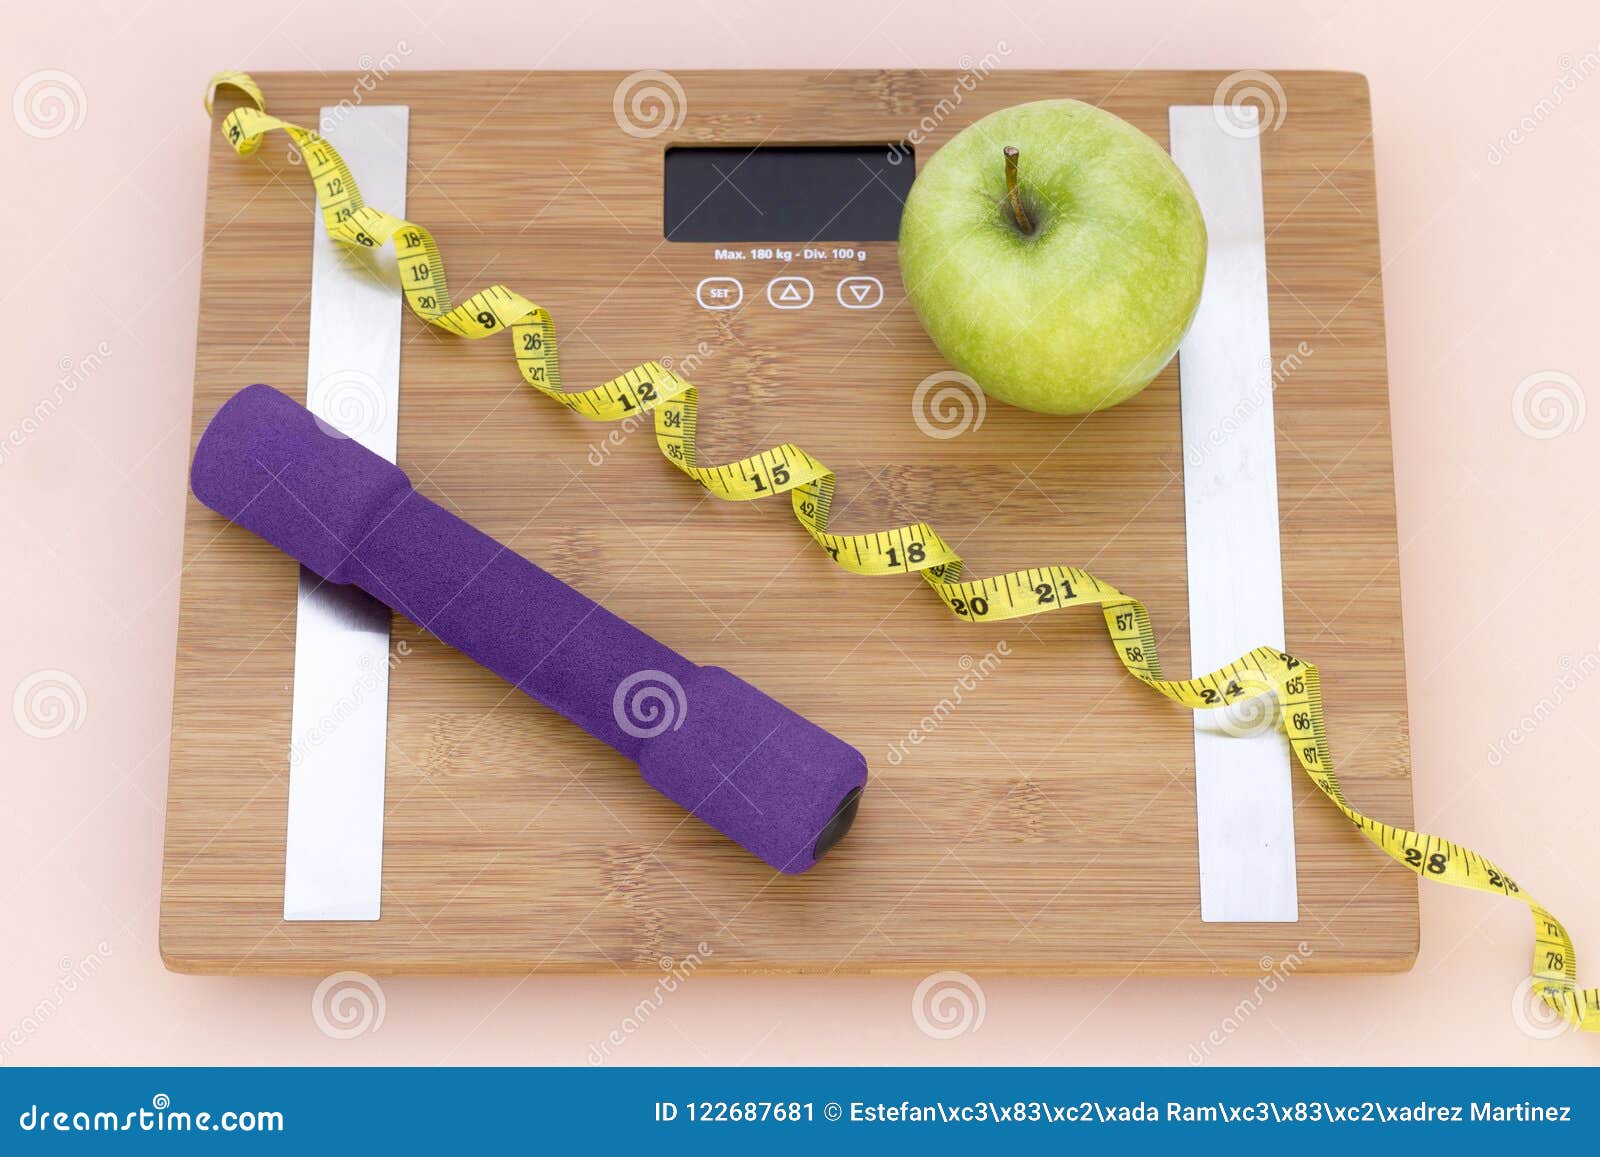 still life photography with a green apple, weight tape measure and a scale